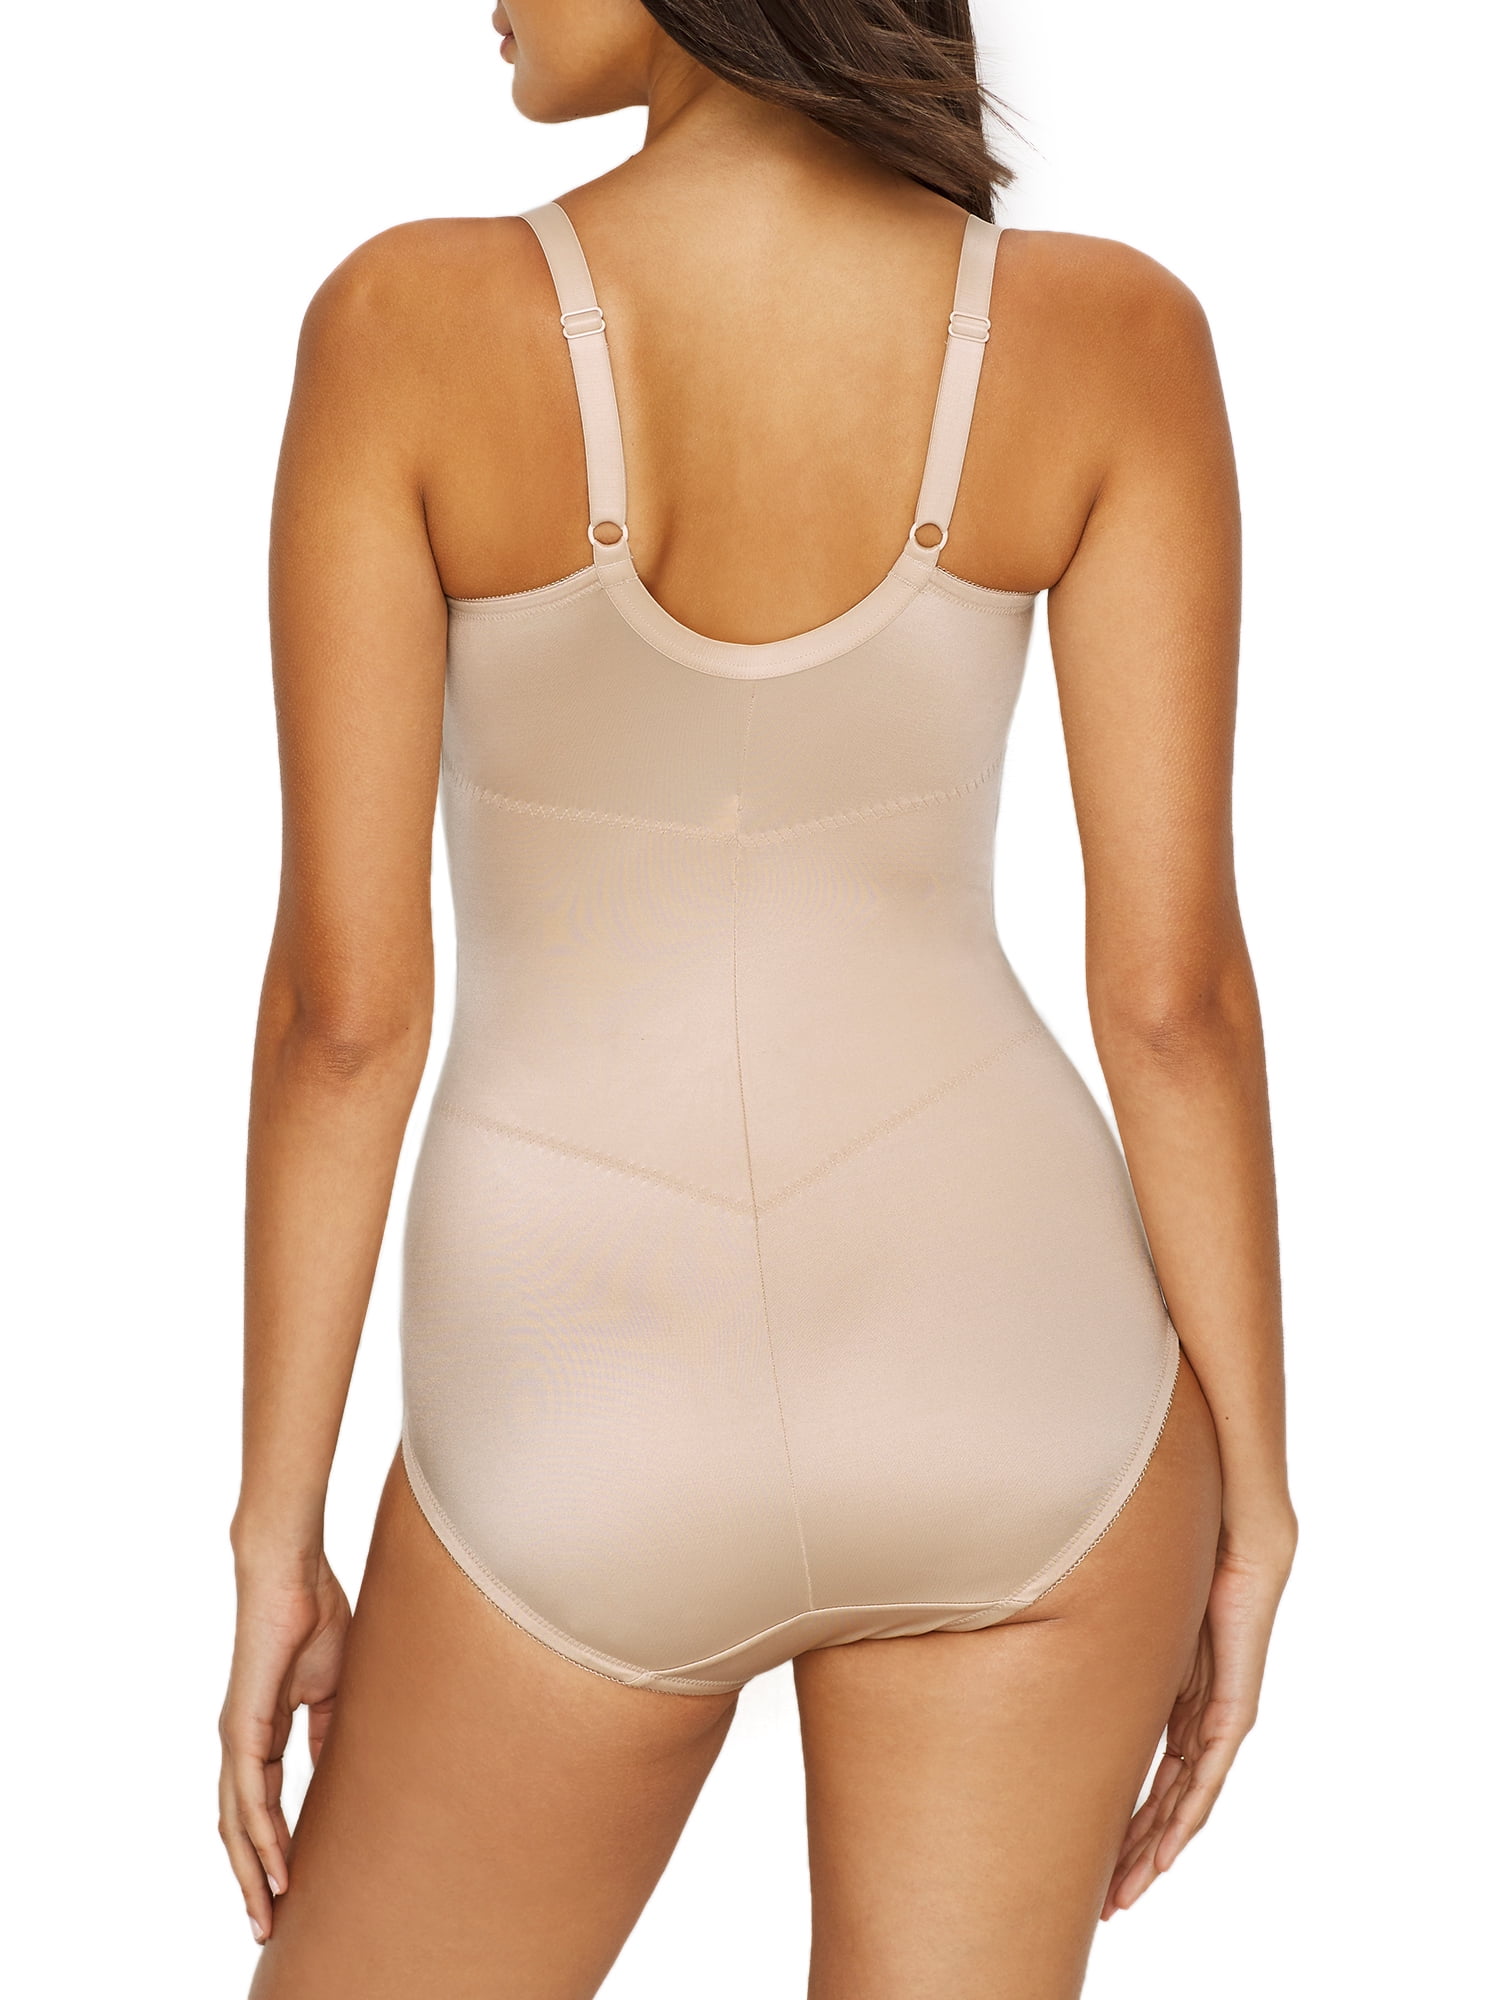 Maidenform Womens Ultra Firm Women's Shapewear, Body Shaper With Built-in  Underwire Bra, Allover Sculpting & Firm Control